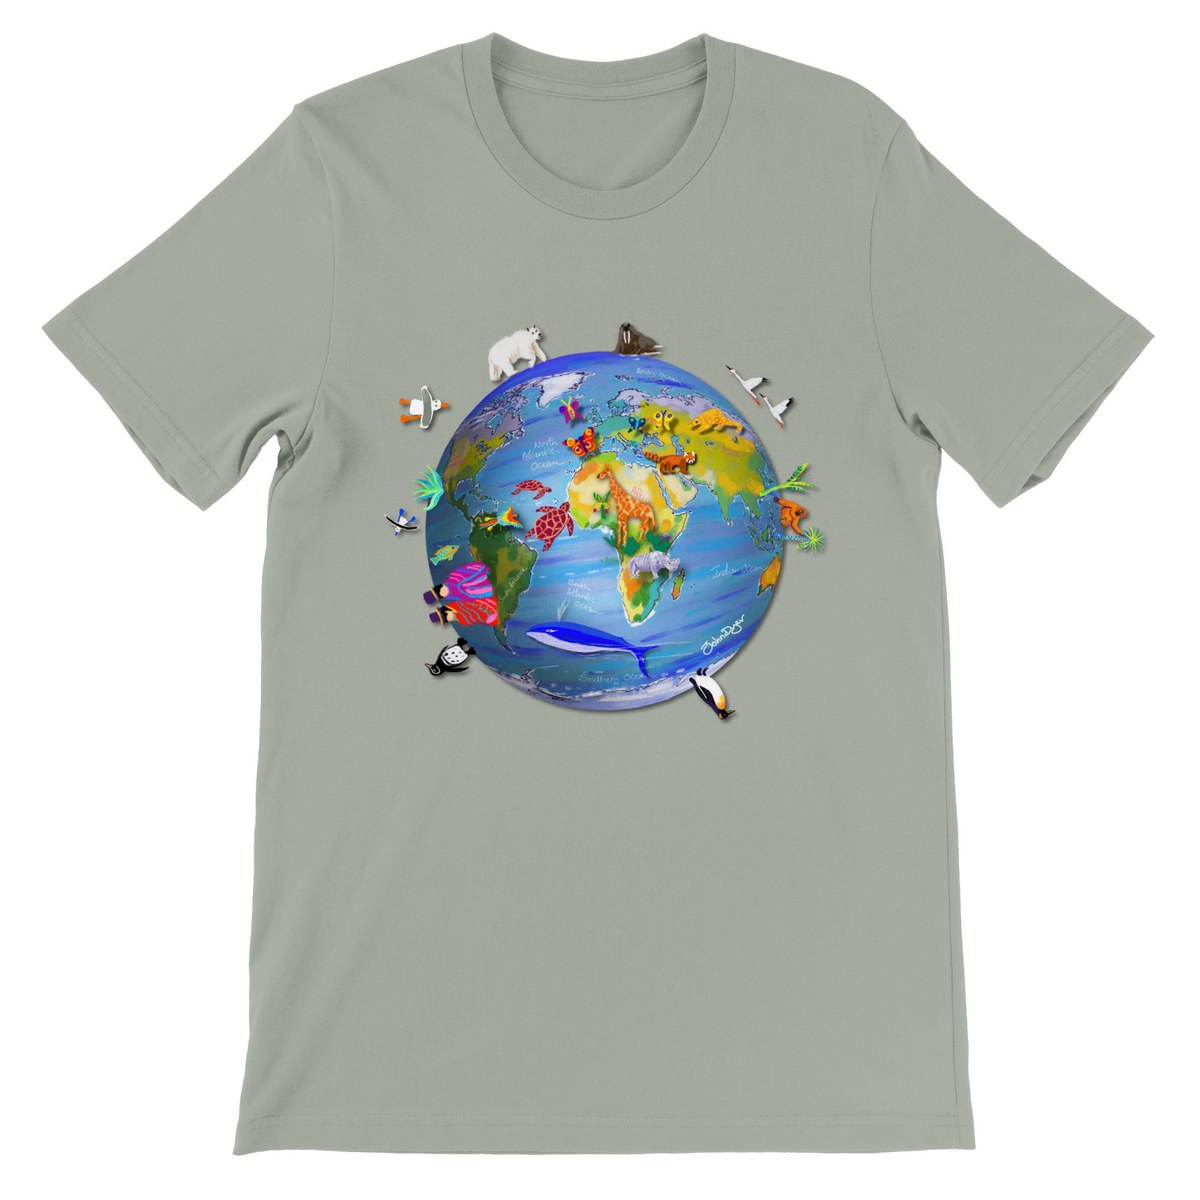 Earth Art T-Shirt by Artist John Dyer. Climate Change and Wildlife - Last Chance to Paint